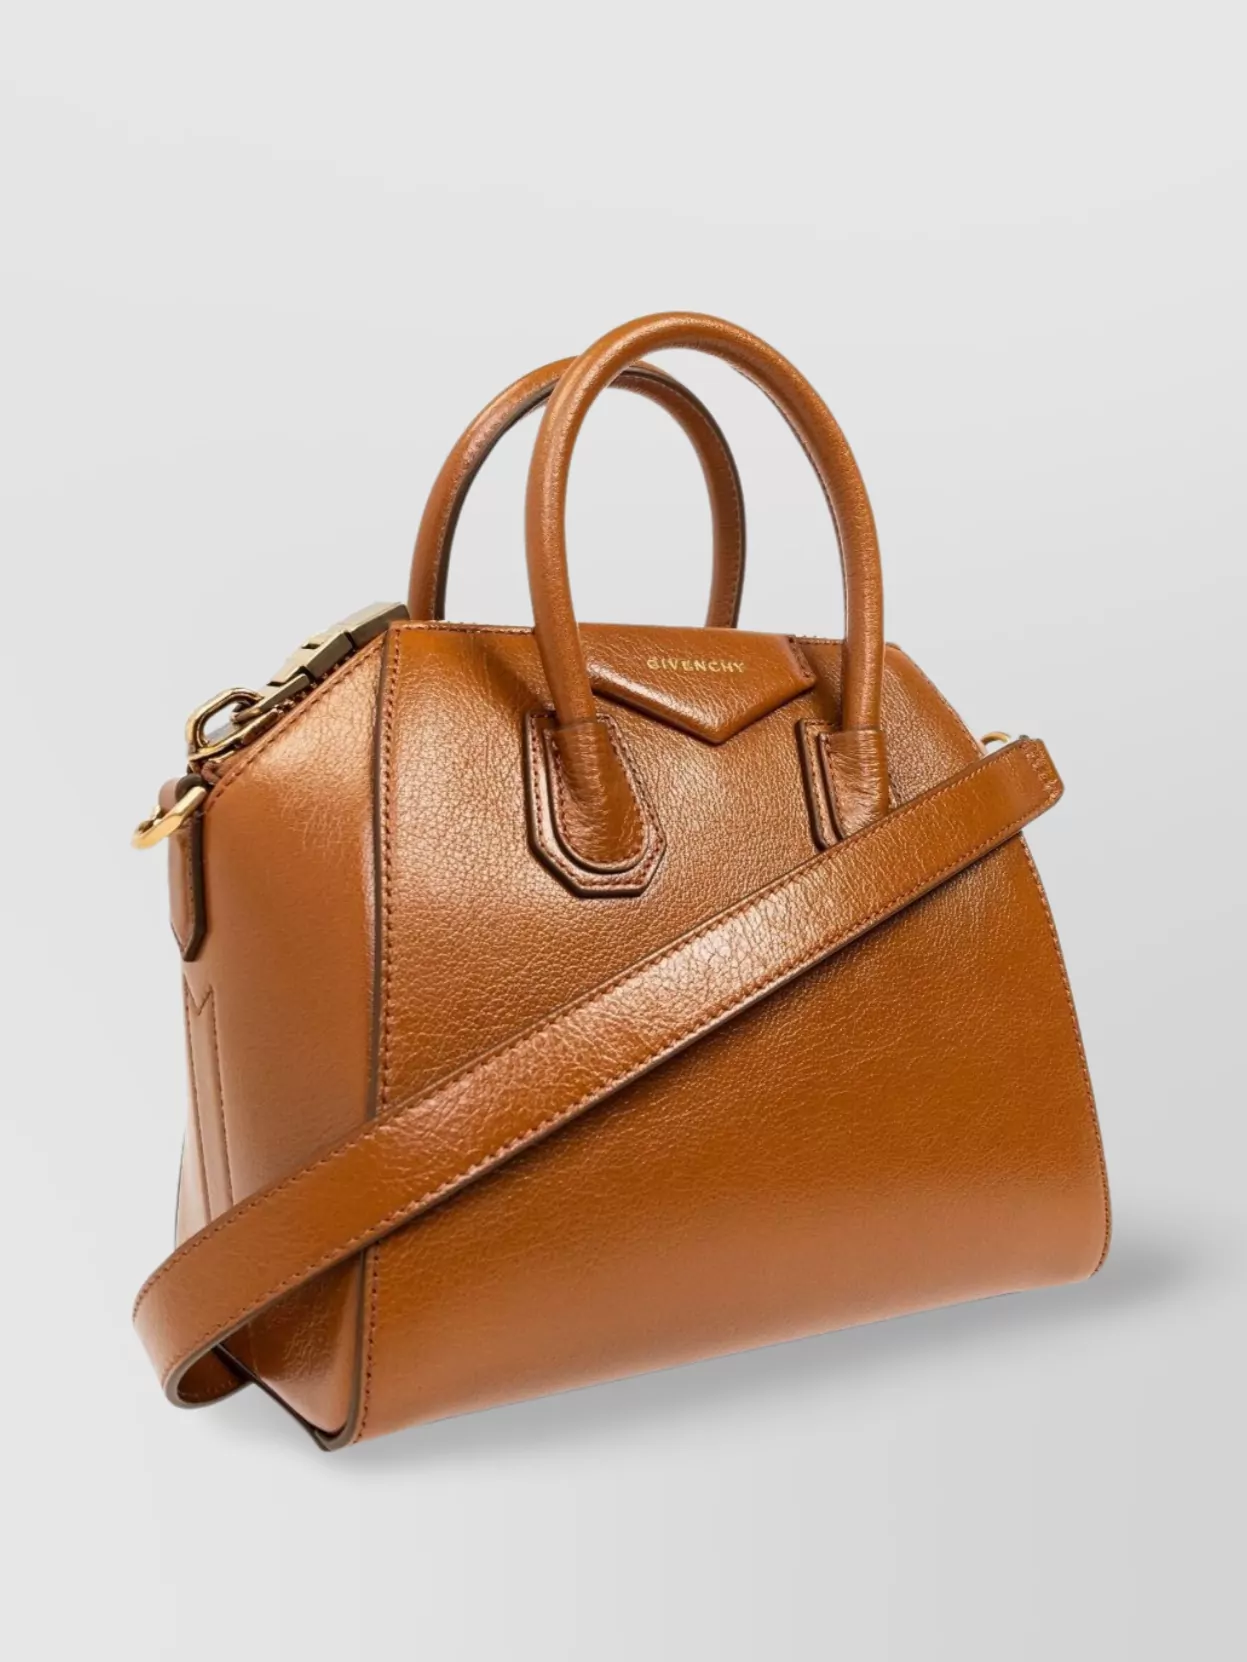 Givenchy Buffalo Leather Shoulder Bag In Brown